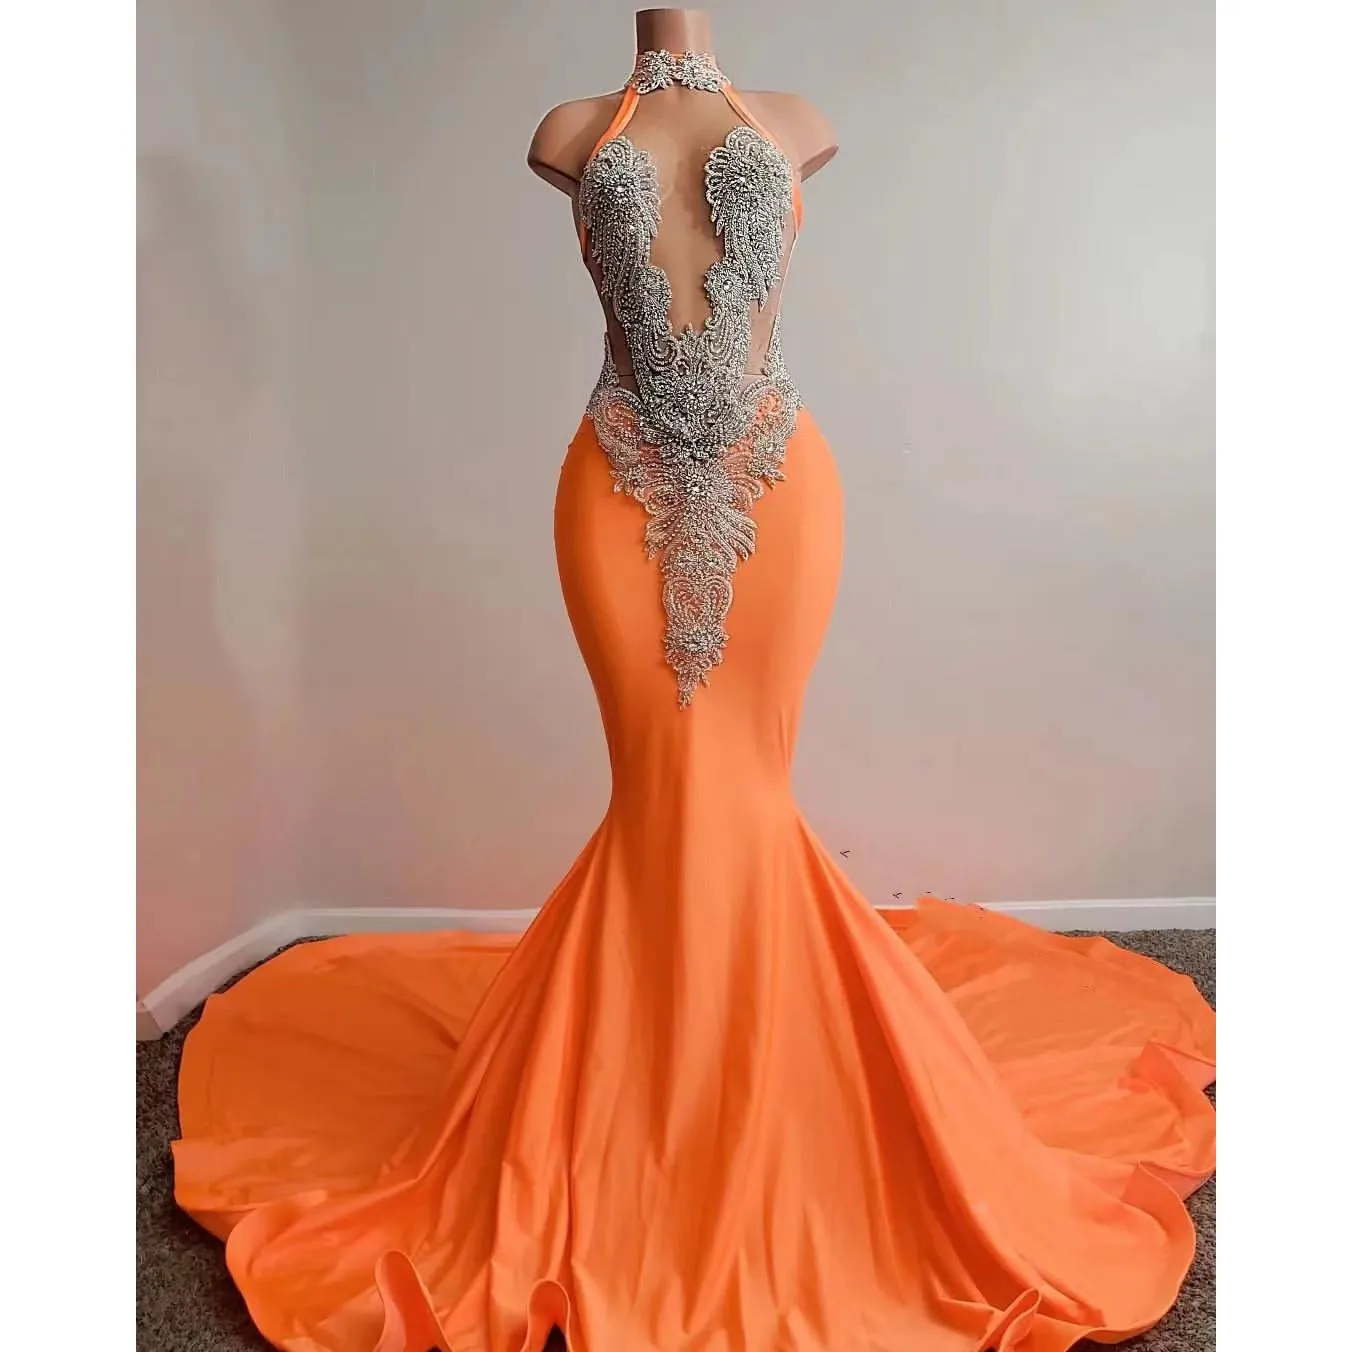 Sexy Orange Prom Dress For African Women Satin Beading Sequined High Neck Sleeveless Red Carpet Long Mermaid Gowns Evening Dresses